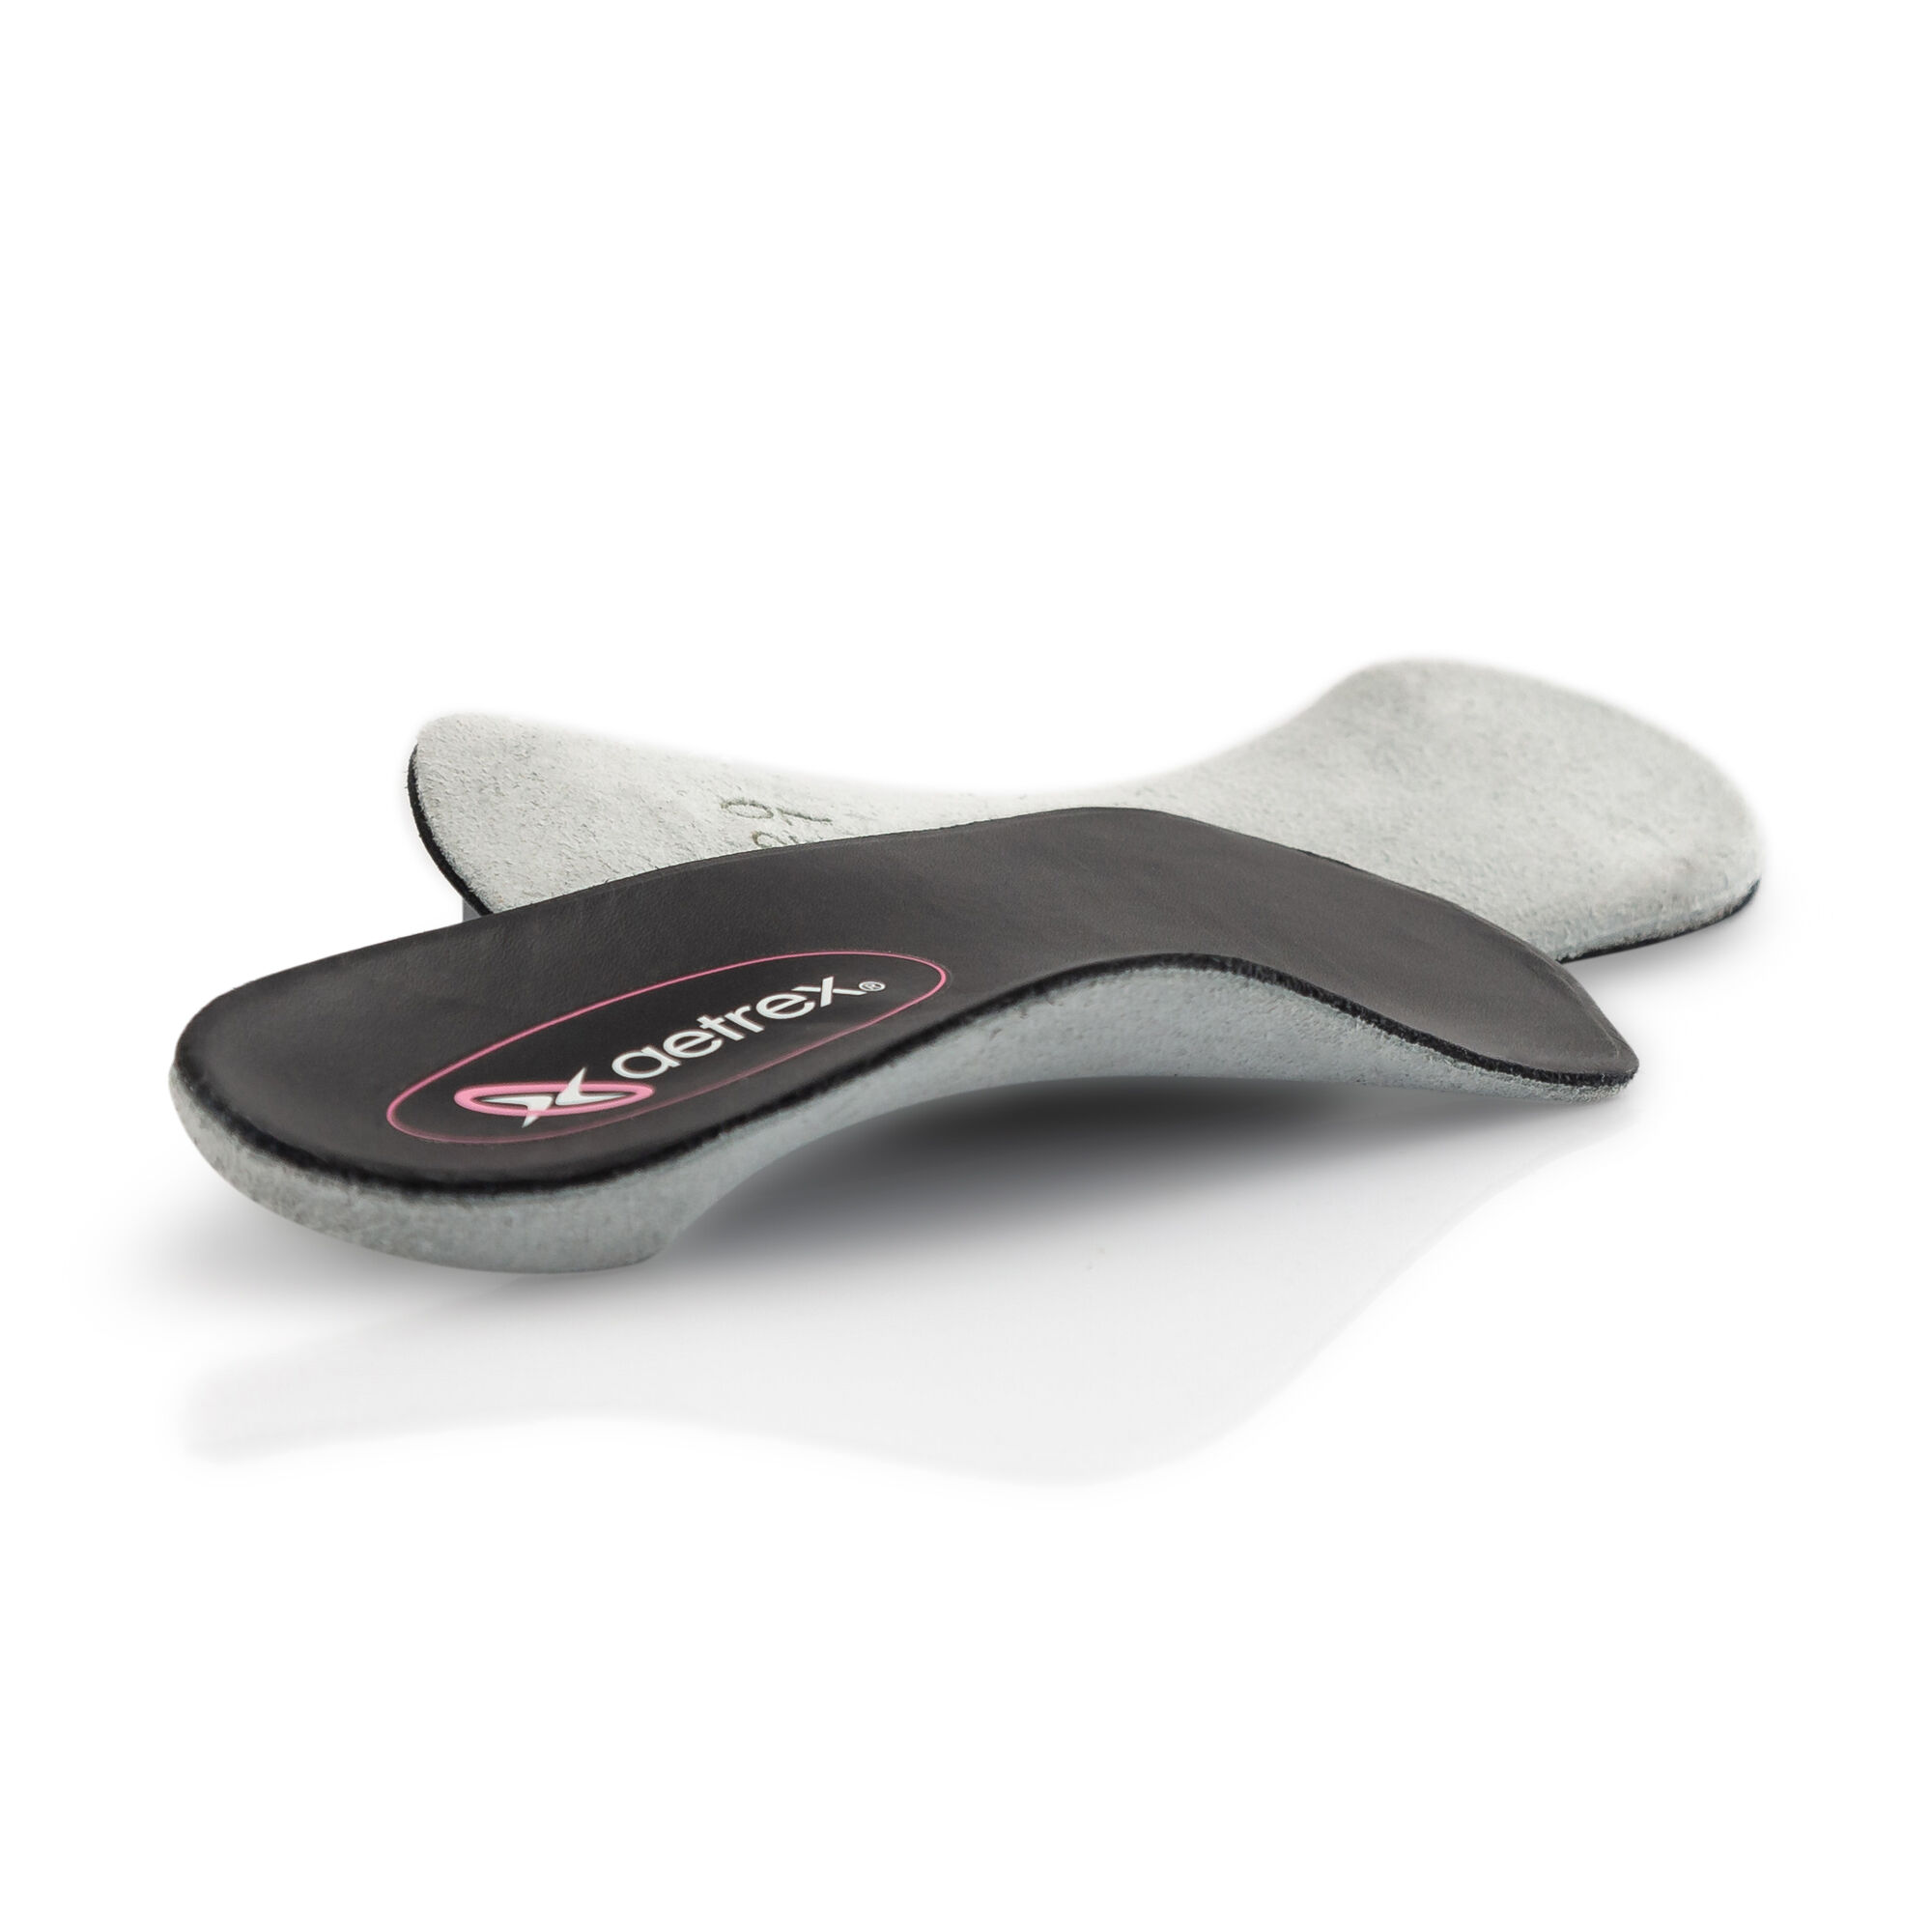 Low Arch W/ Metatarsal Support Orthotic